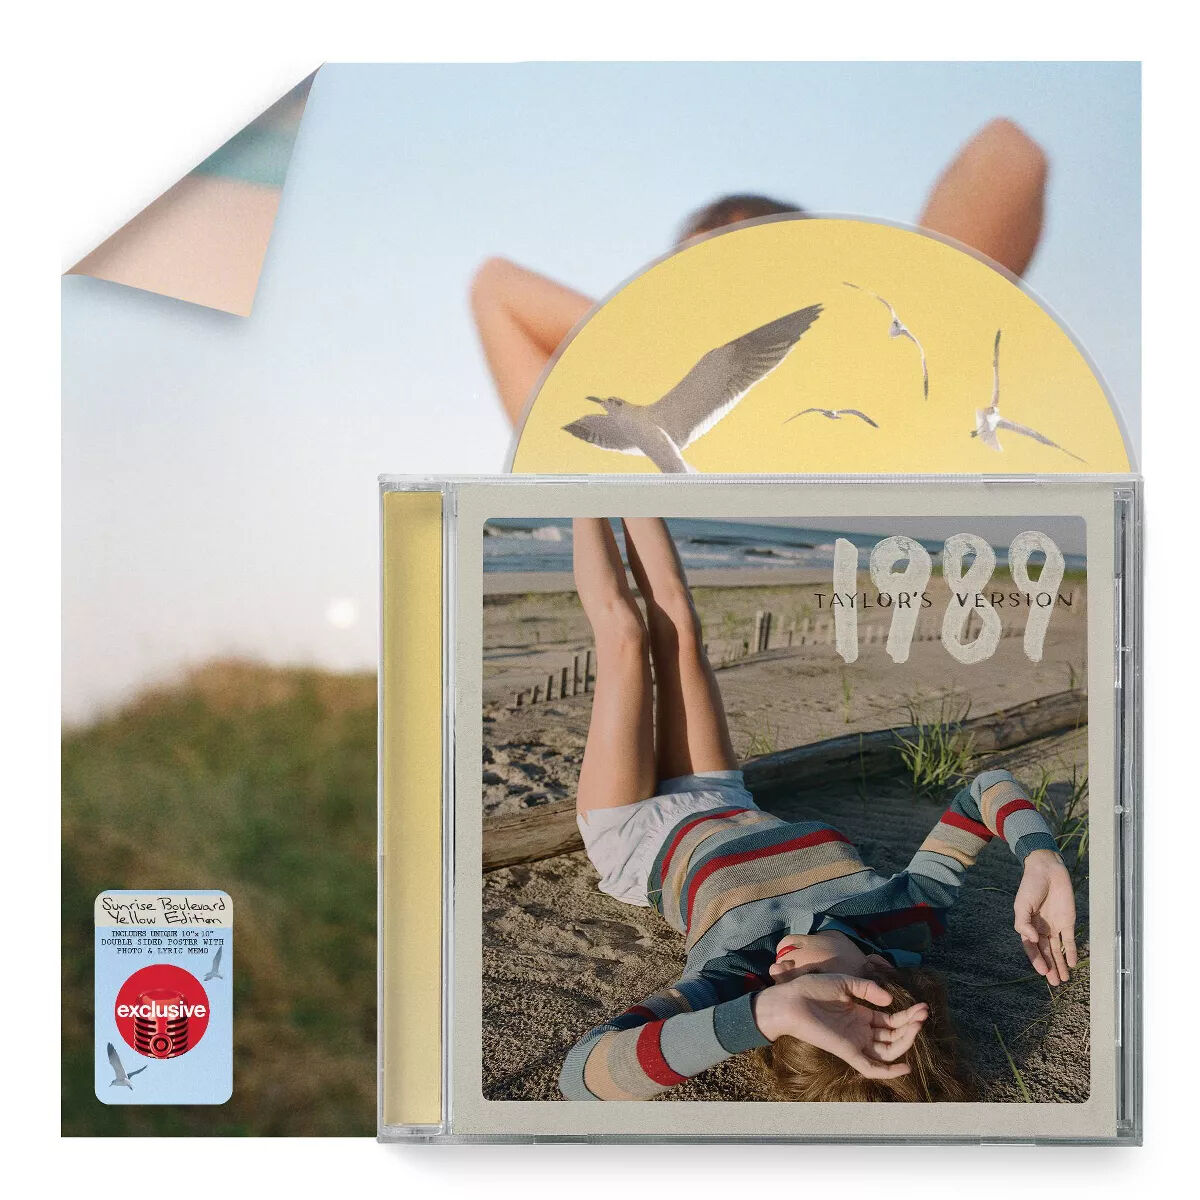 TAYLOR SWIFT 1989 (Taylor’s Version) Sunset Boulevard Yellow Deluxe Edition Target CD